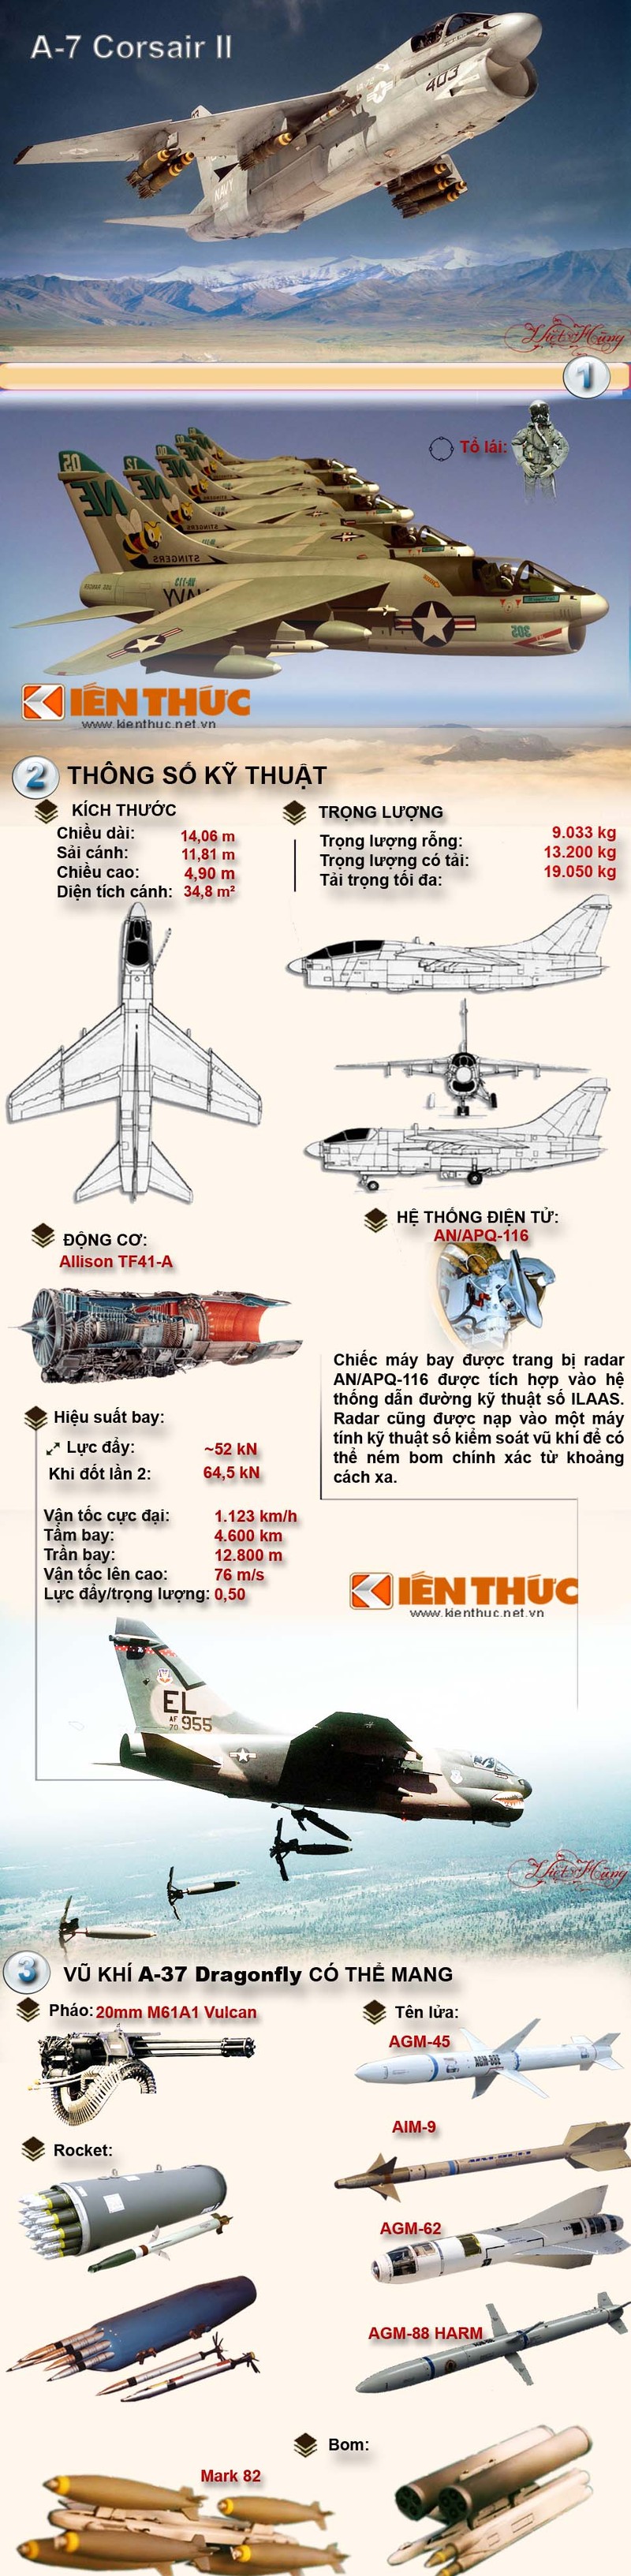 Infographic: May bay cuong kich A-7 trong Chien tranh Viet Nam